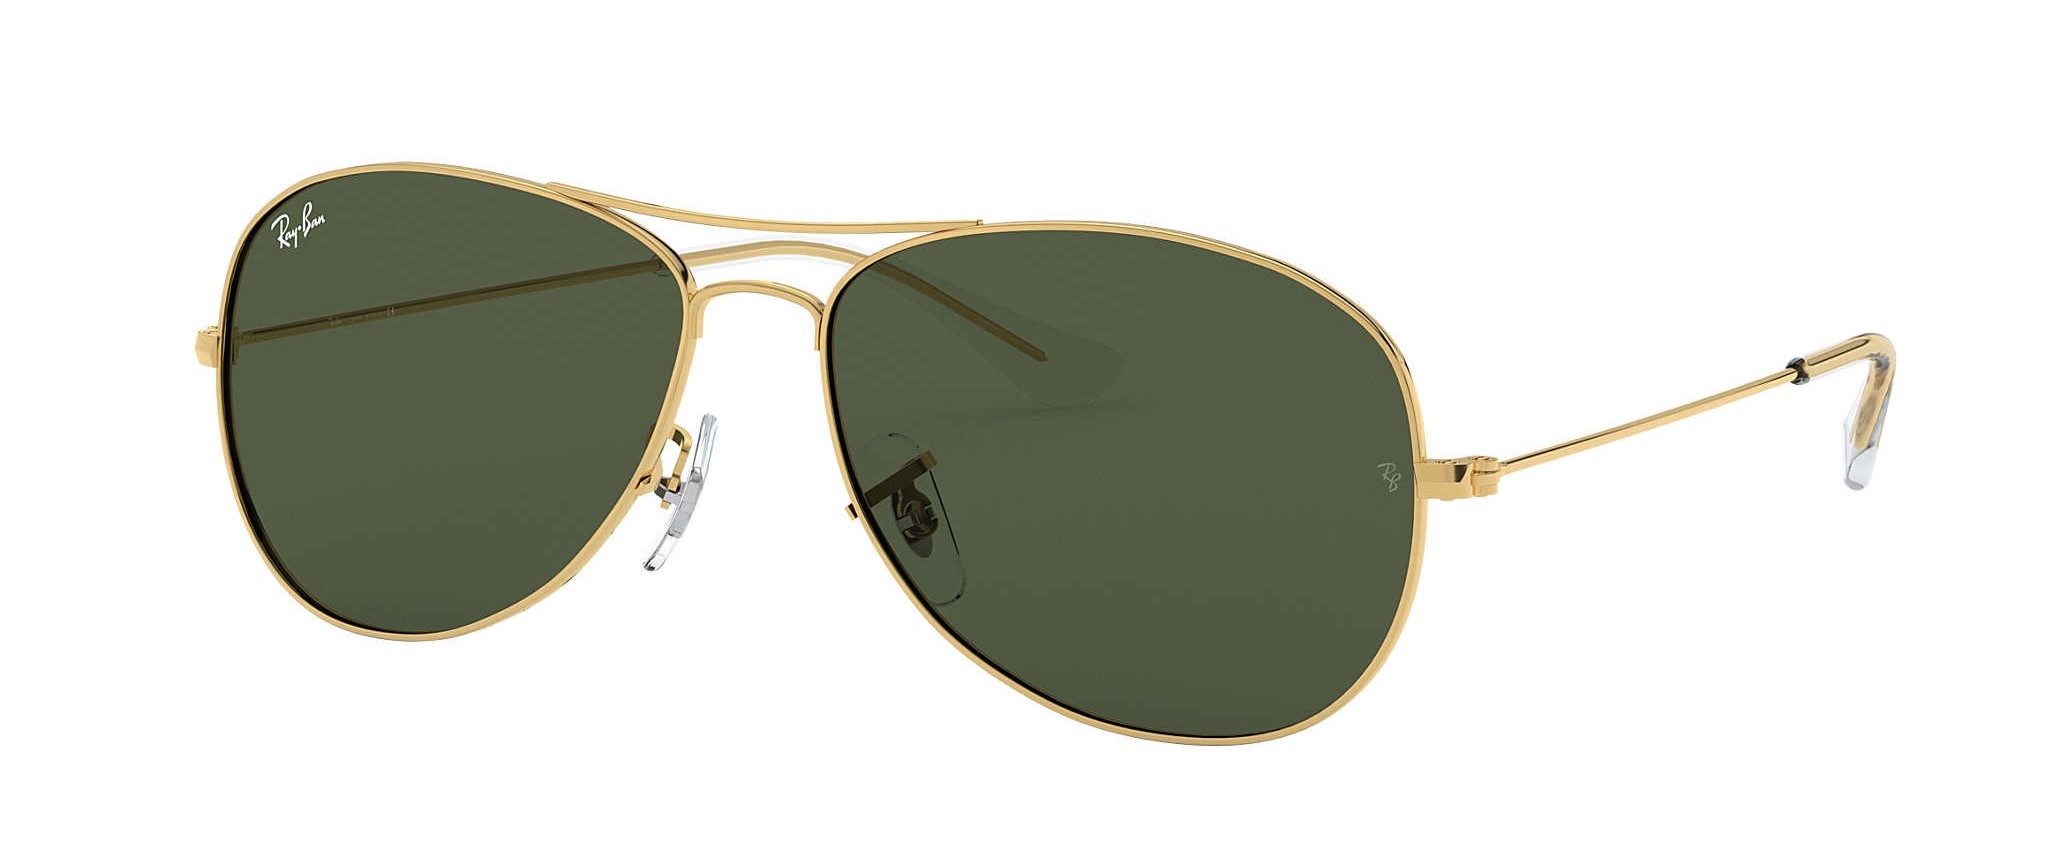 Ray-Ban RB3362 Cockpit Sunglasses in arista gold with green g-15 lenses